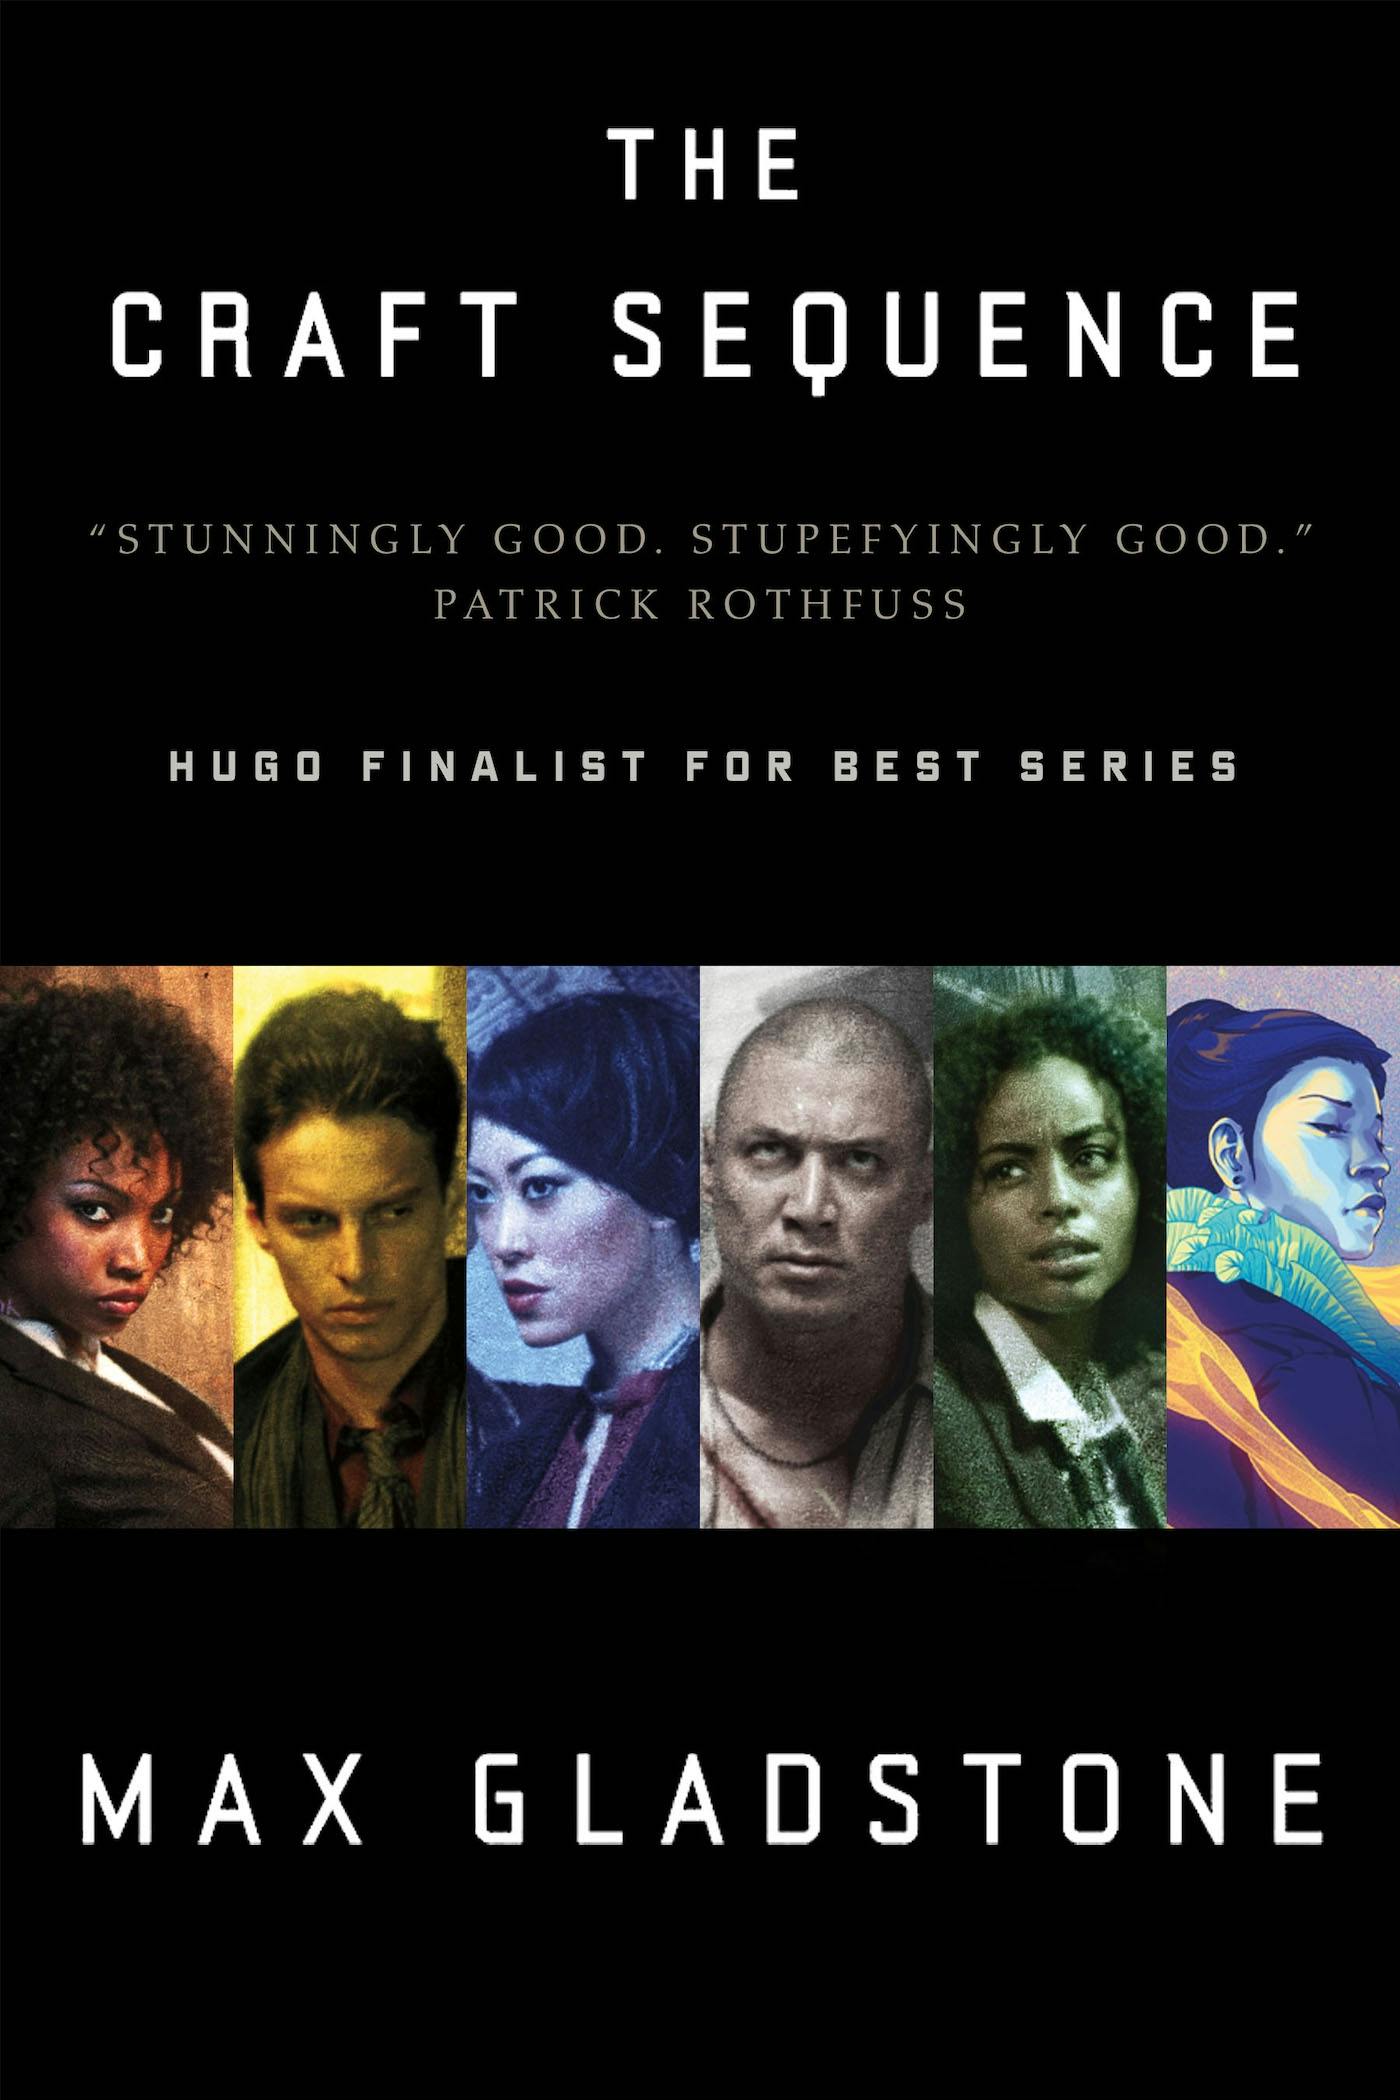 Cover for the book titled as: The Craft Sequence